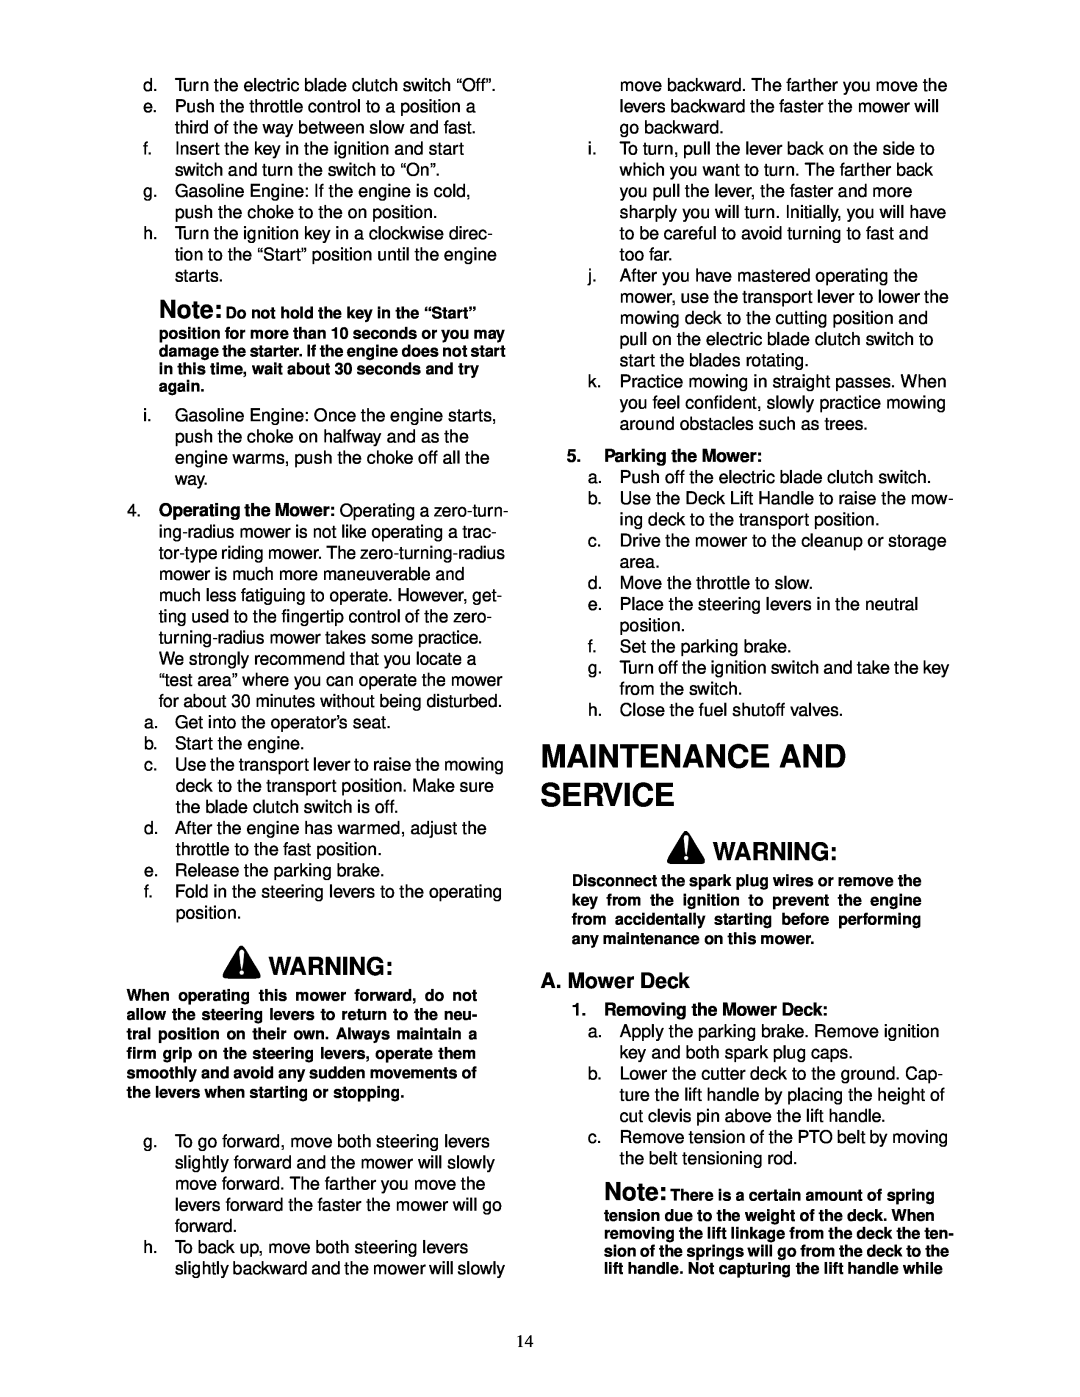 MTD 18HP service manual Maintenance And Service, A. Mower Deck, Parking the Mower, Removing the Mower Deck 